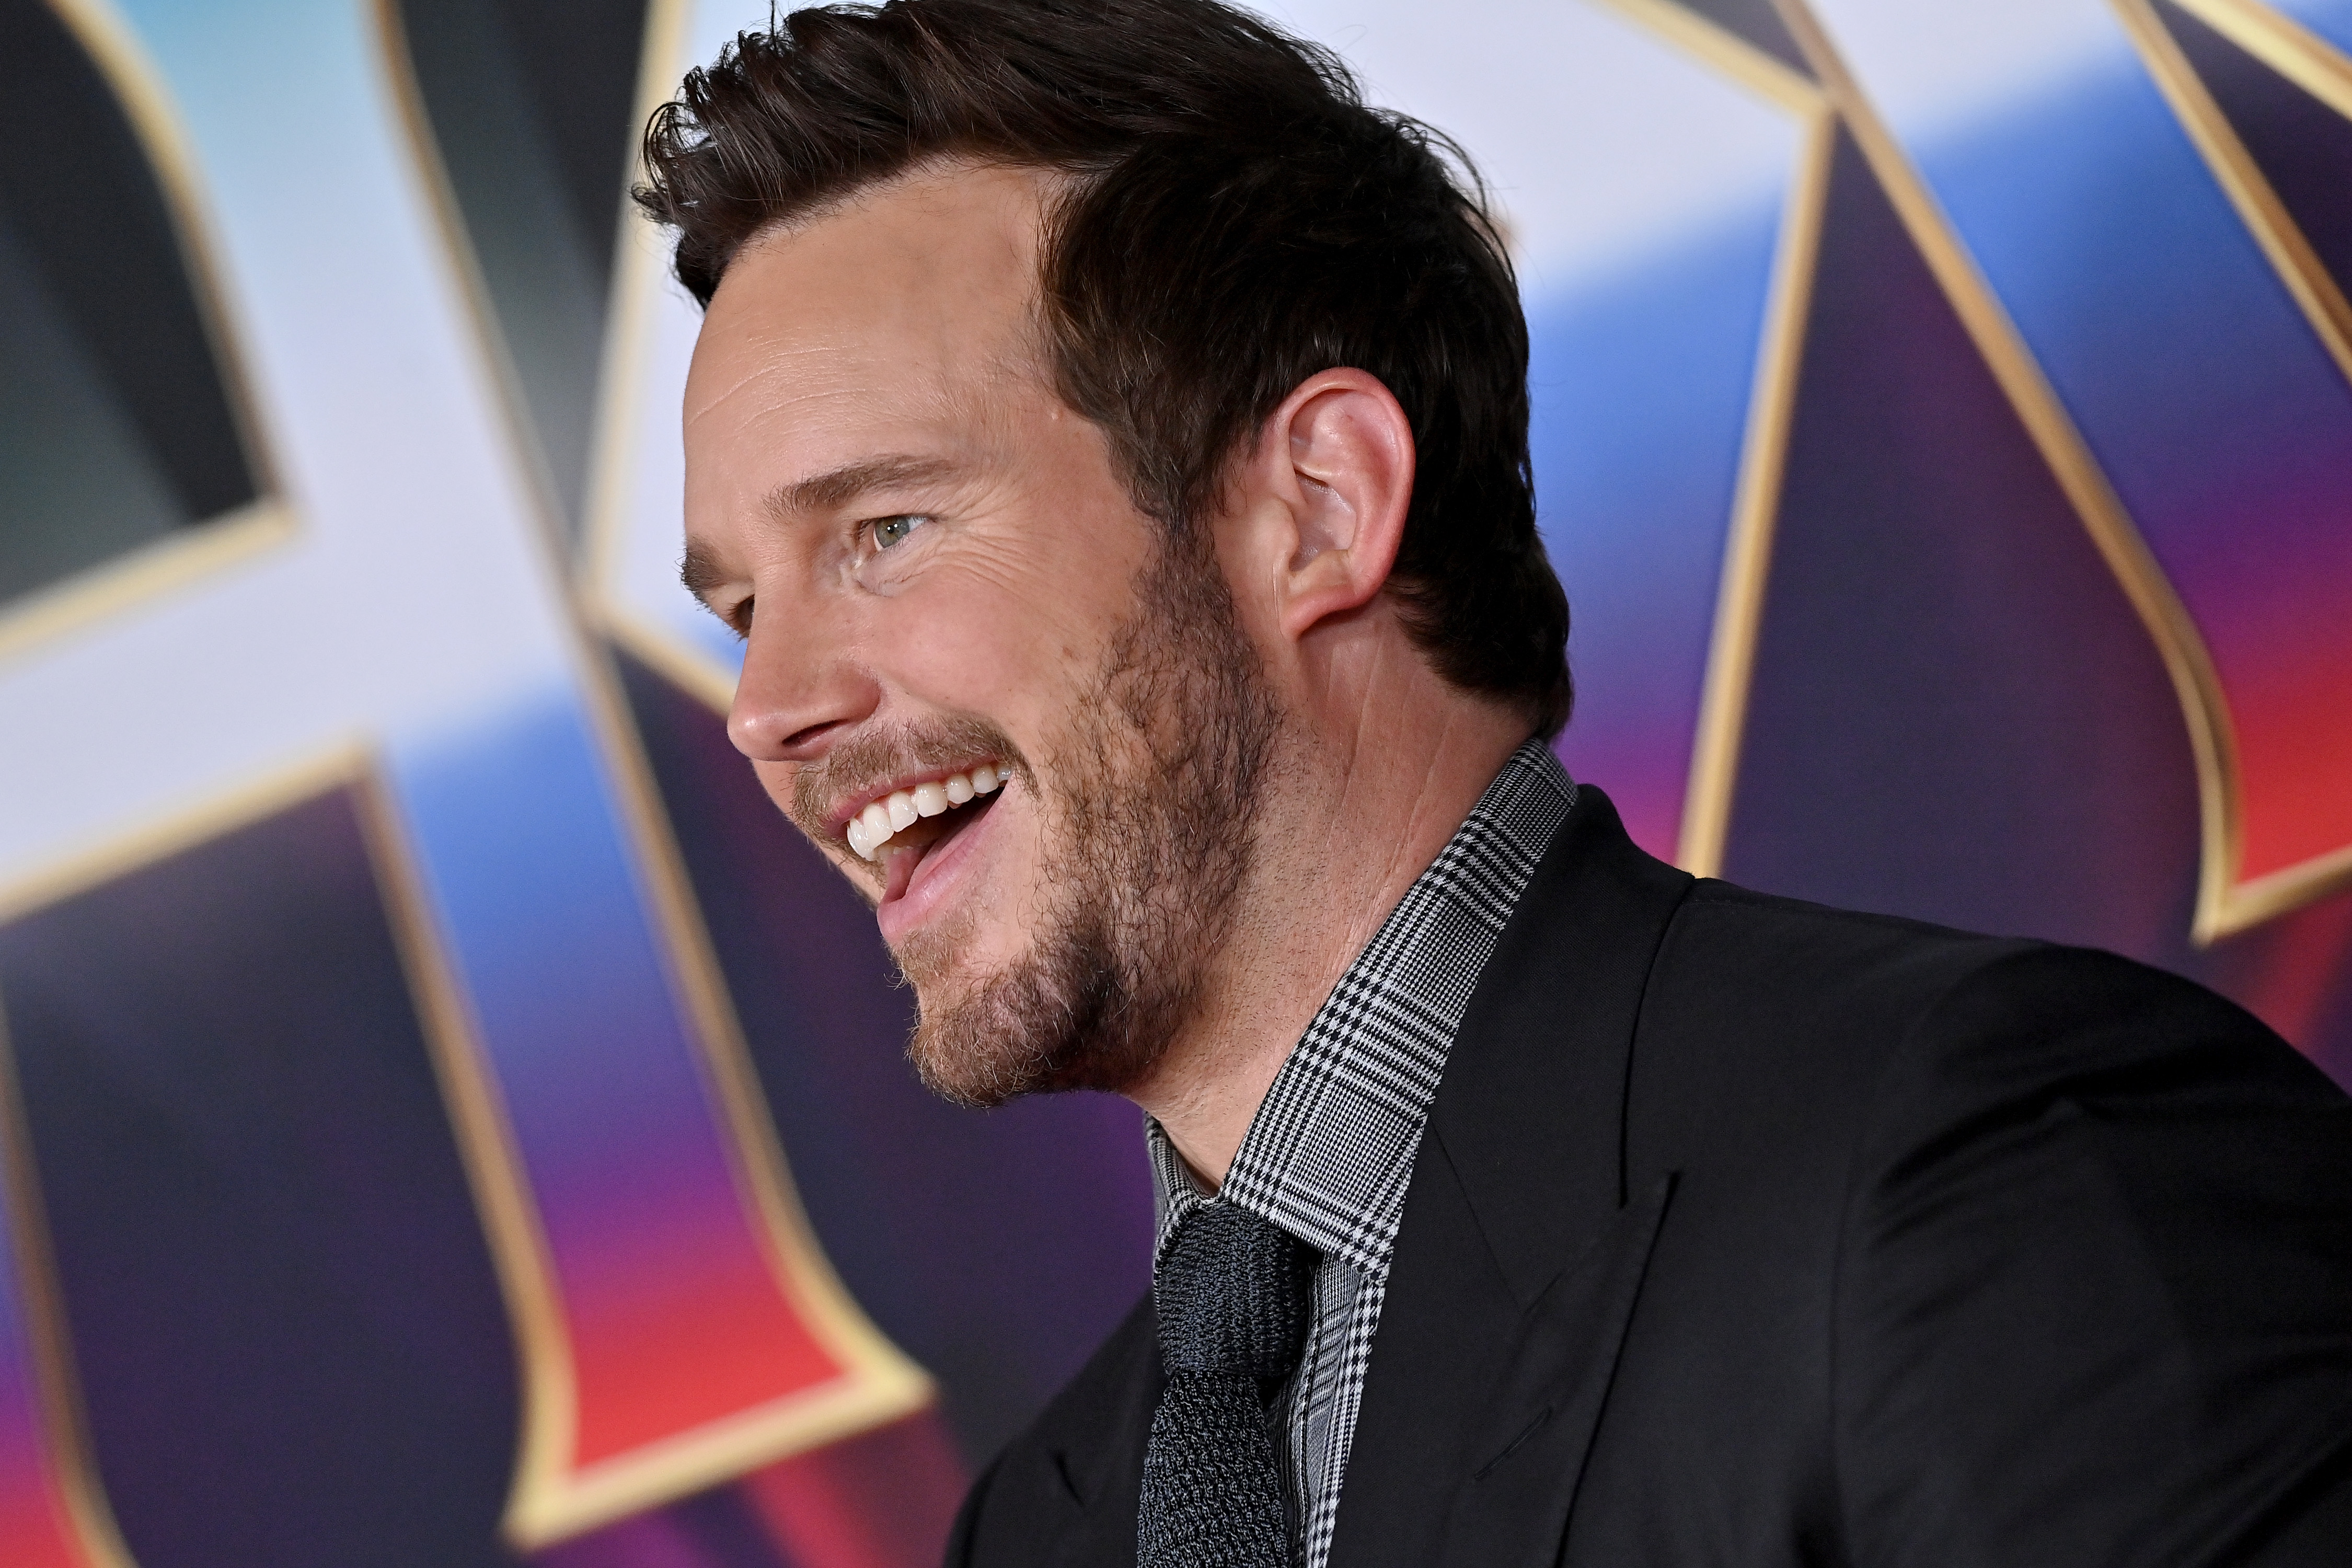 Chris Pratt at the Los Angeles premiere of "Thor: Love and Thunder," 2022 | Sources: Getty Images